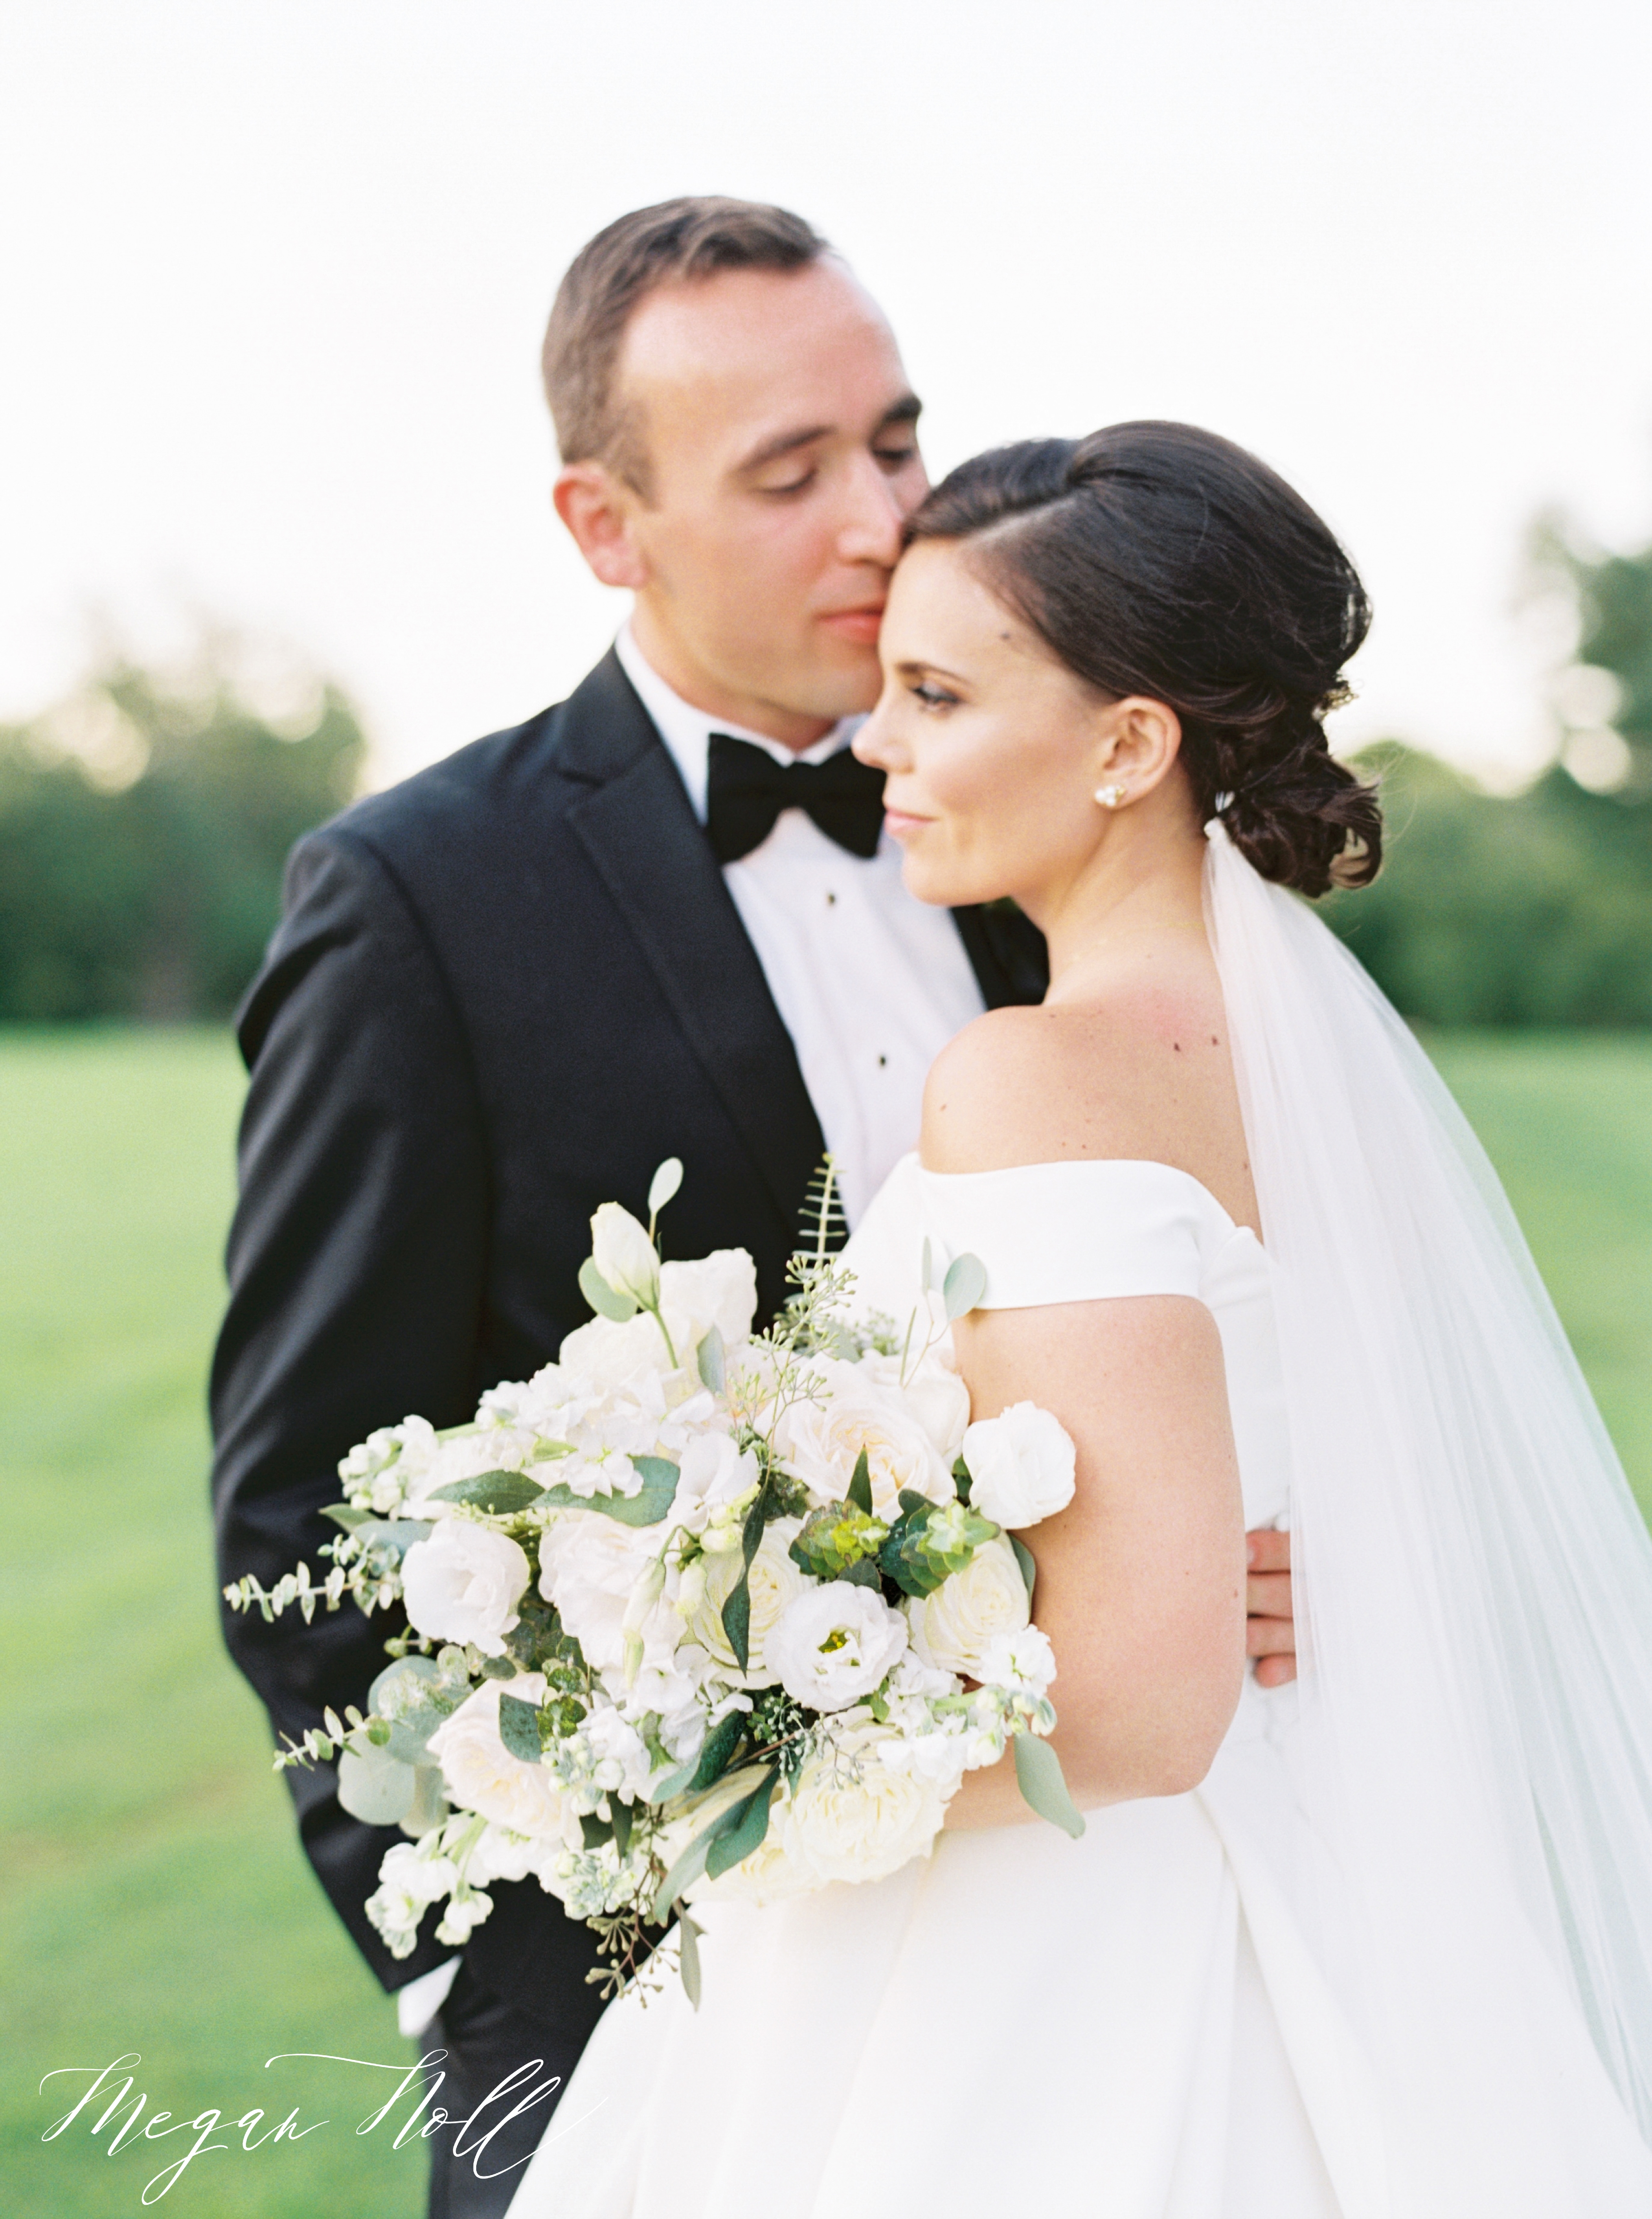 Sunset portraits of Bride and Groom, Maria Zumdick and Ross Vocke